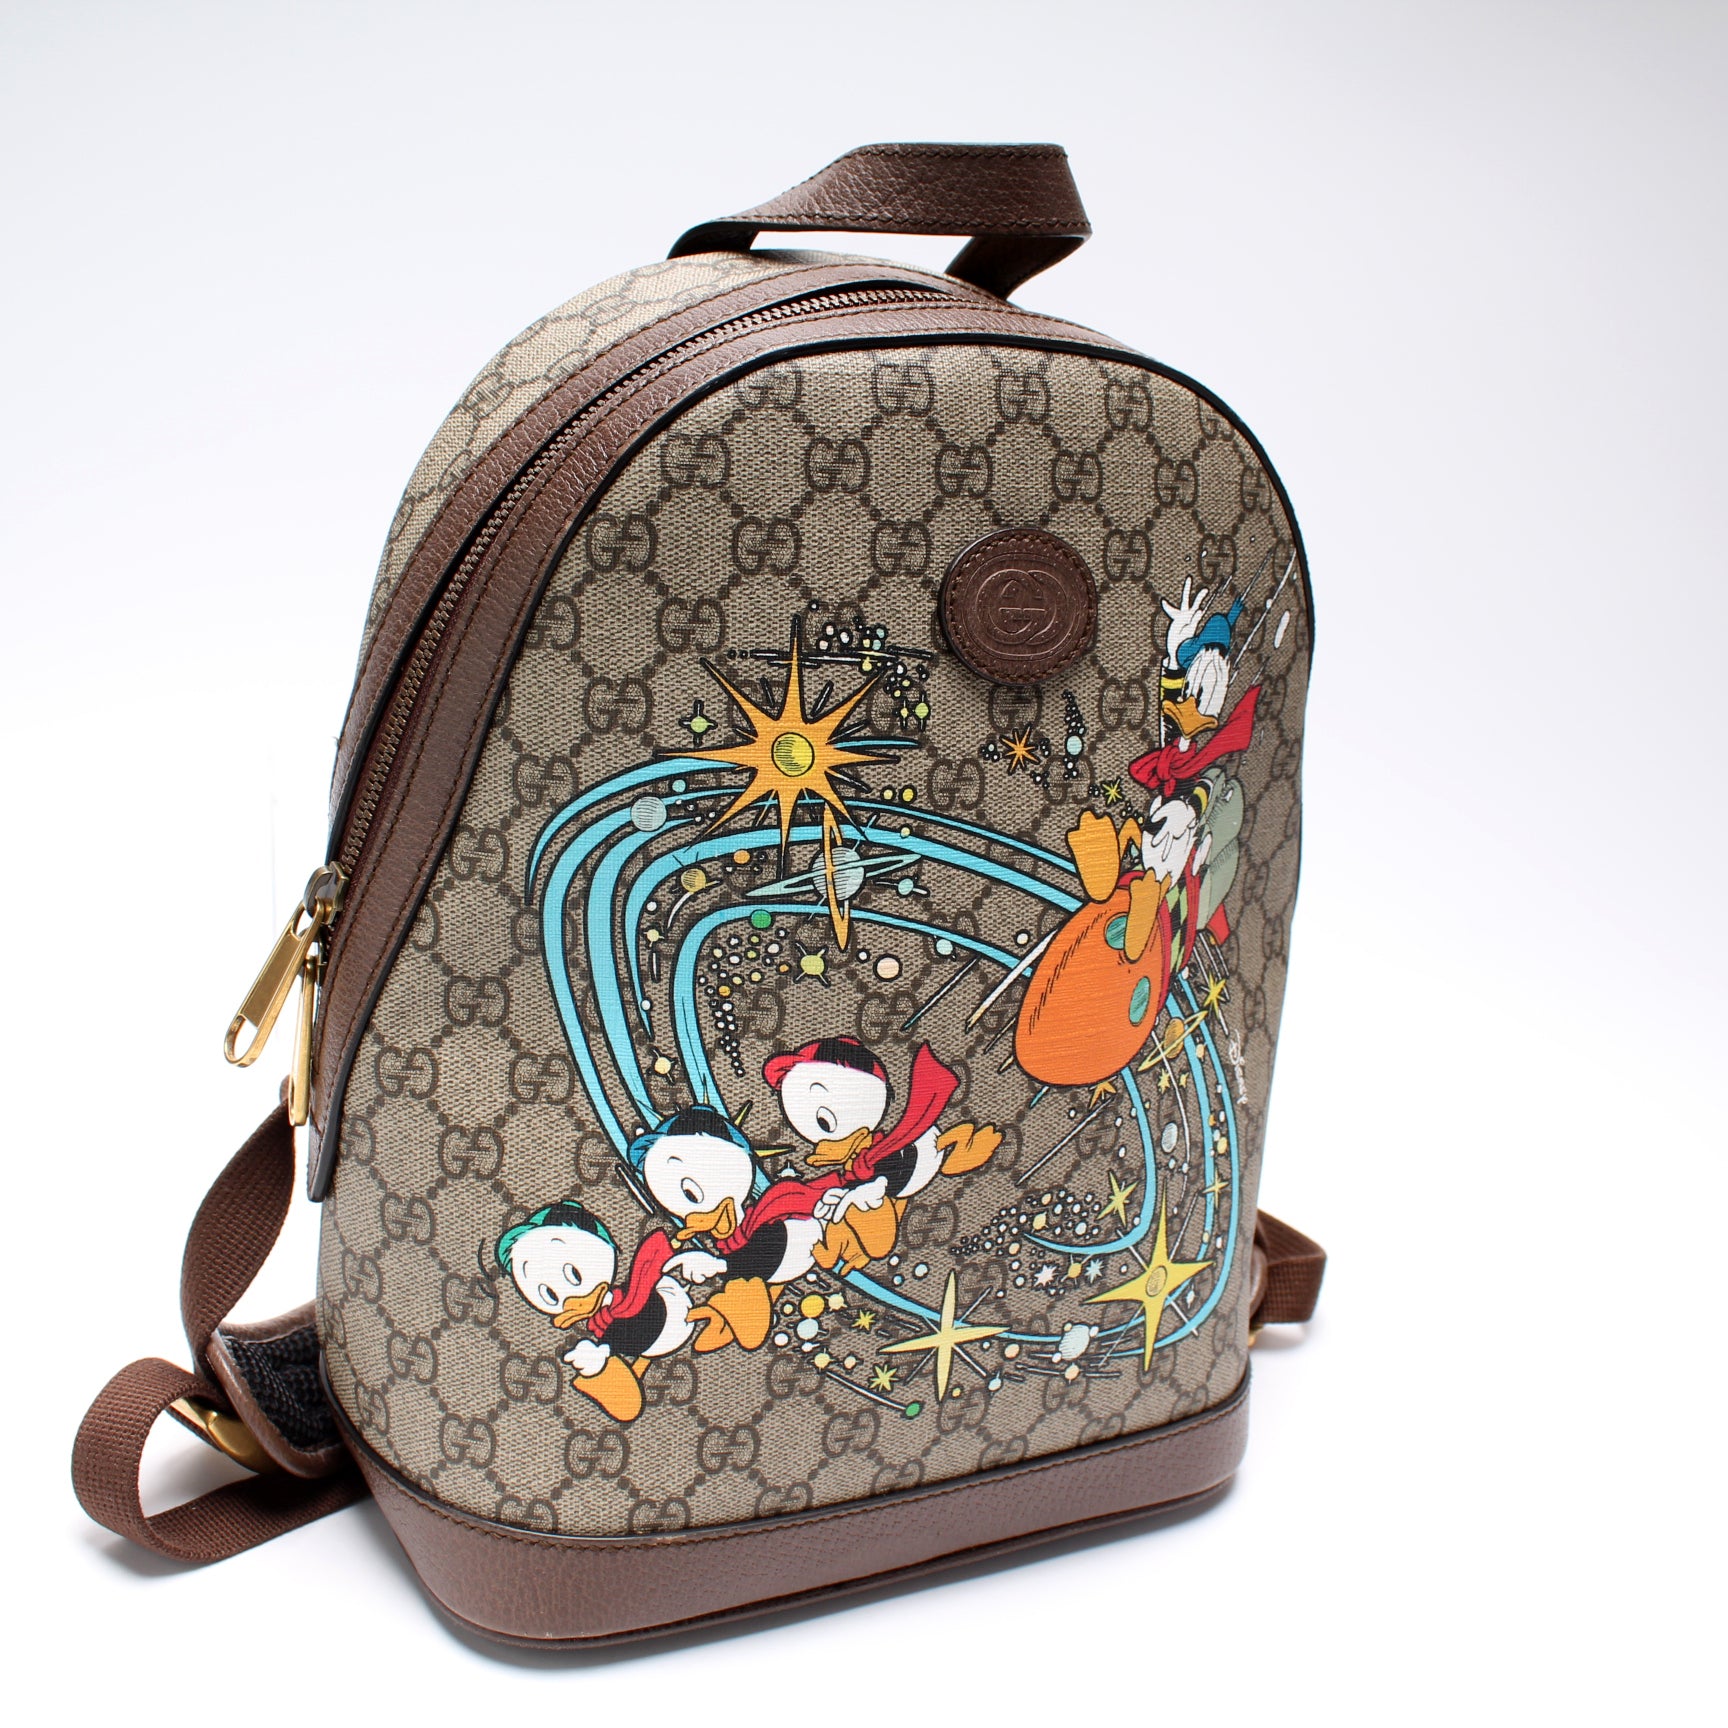 Gucci GG Supreme Donald Duck Backpack